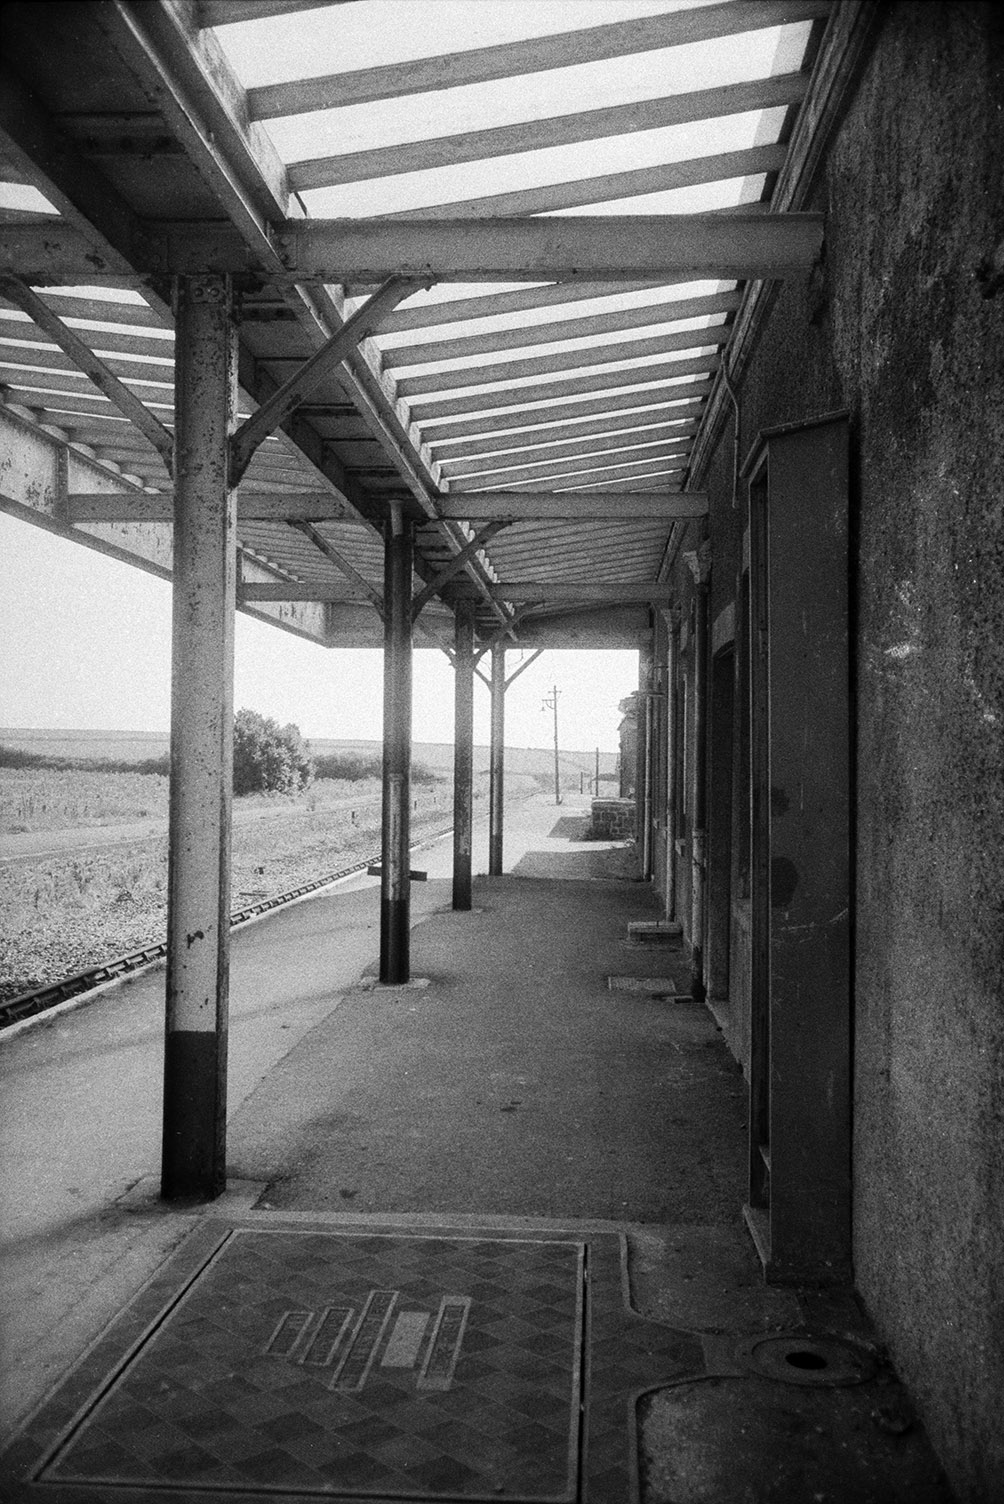 The platform at Woolacombe and Mortehoe Railway Station. A shelter extends over the platform.